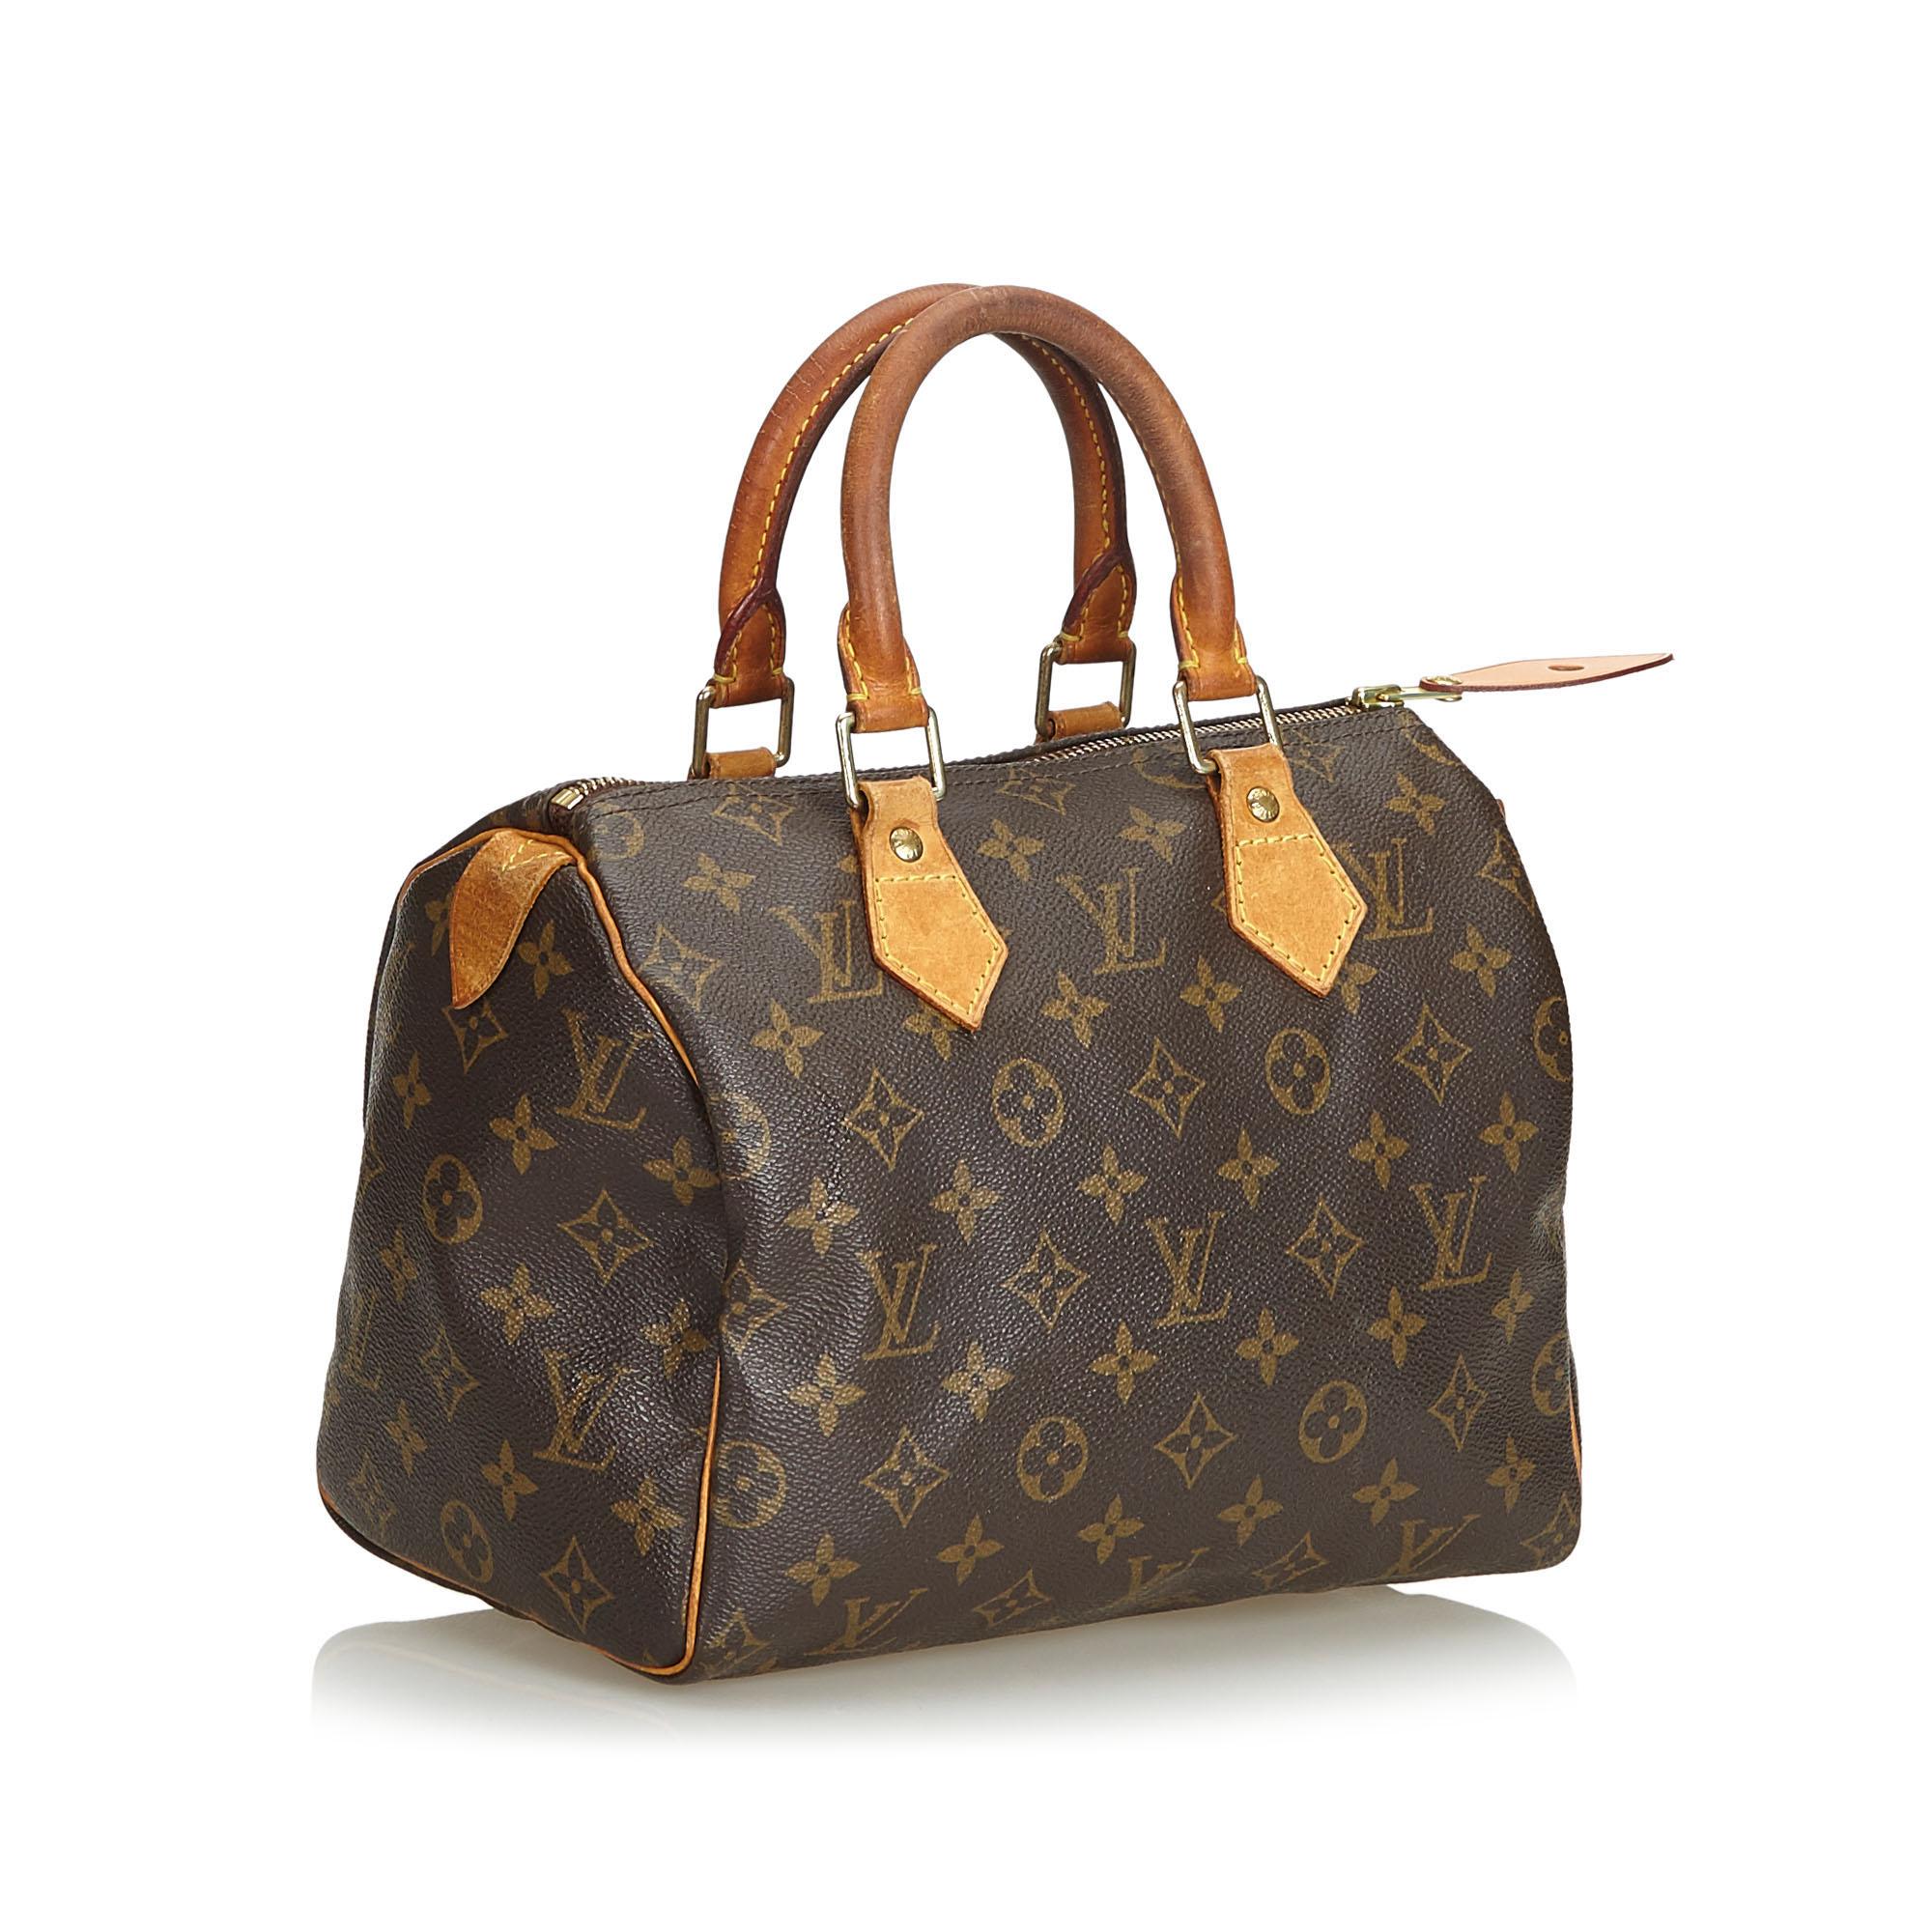 The Speedy 25 features a monogram canvas body, rolled leather handles, a top zip closure, and an interior slip pocket. It carries as B condition rating.

Inclusions: 
This item does not come with inclusions.


Louis Vuitton pieces do not come with